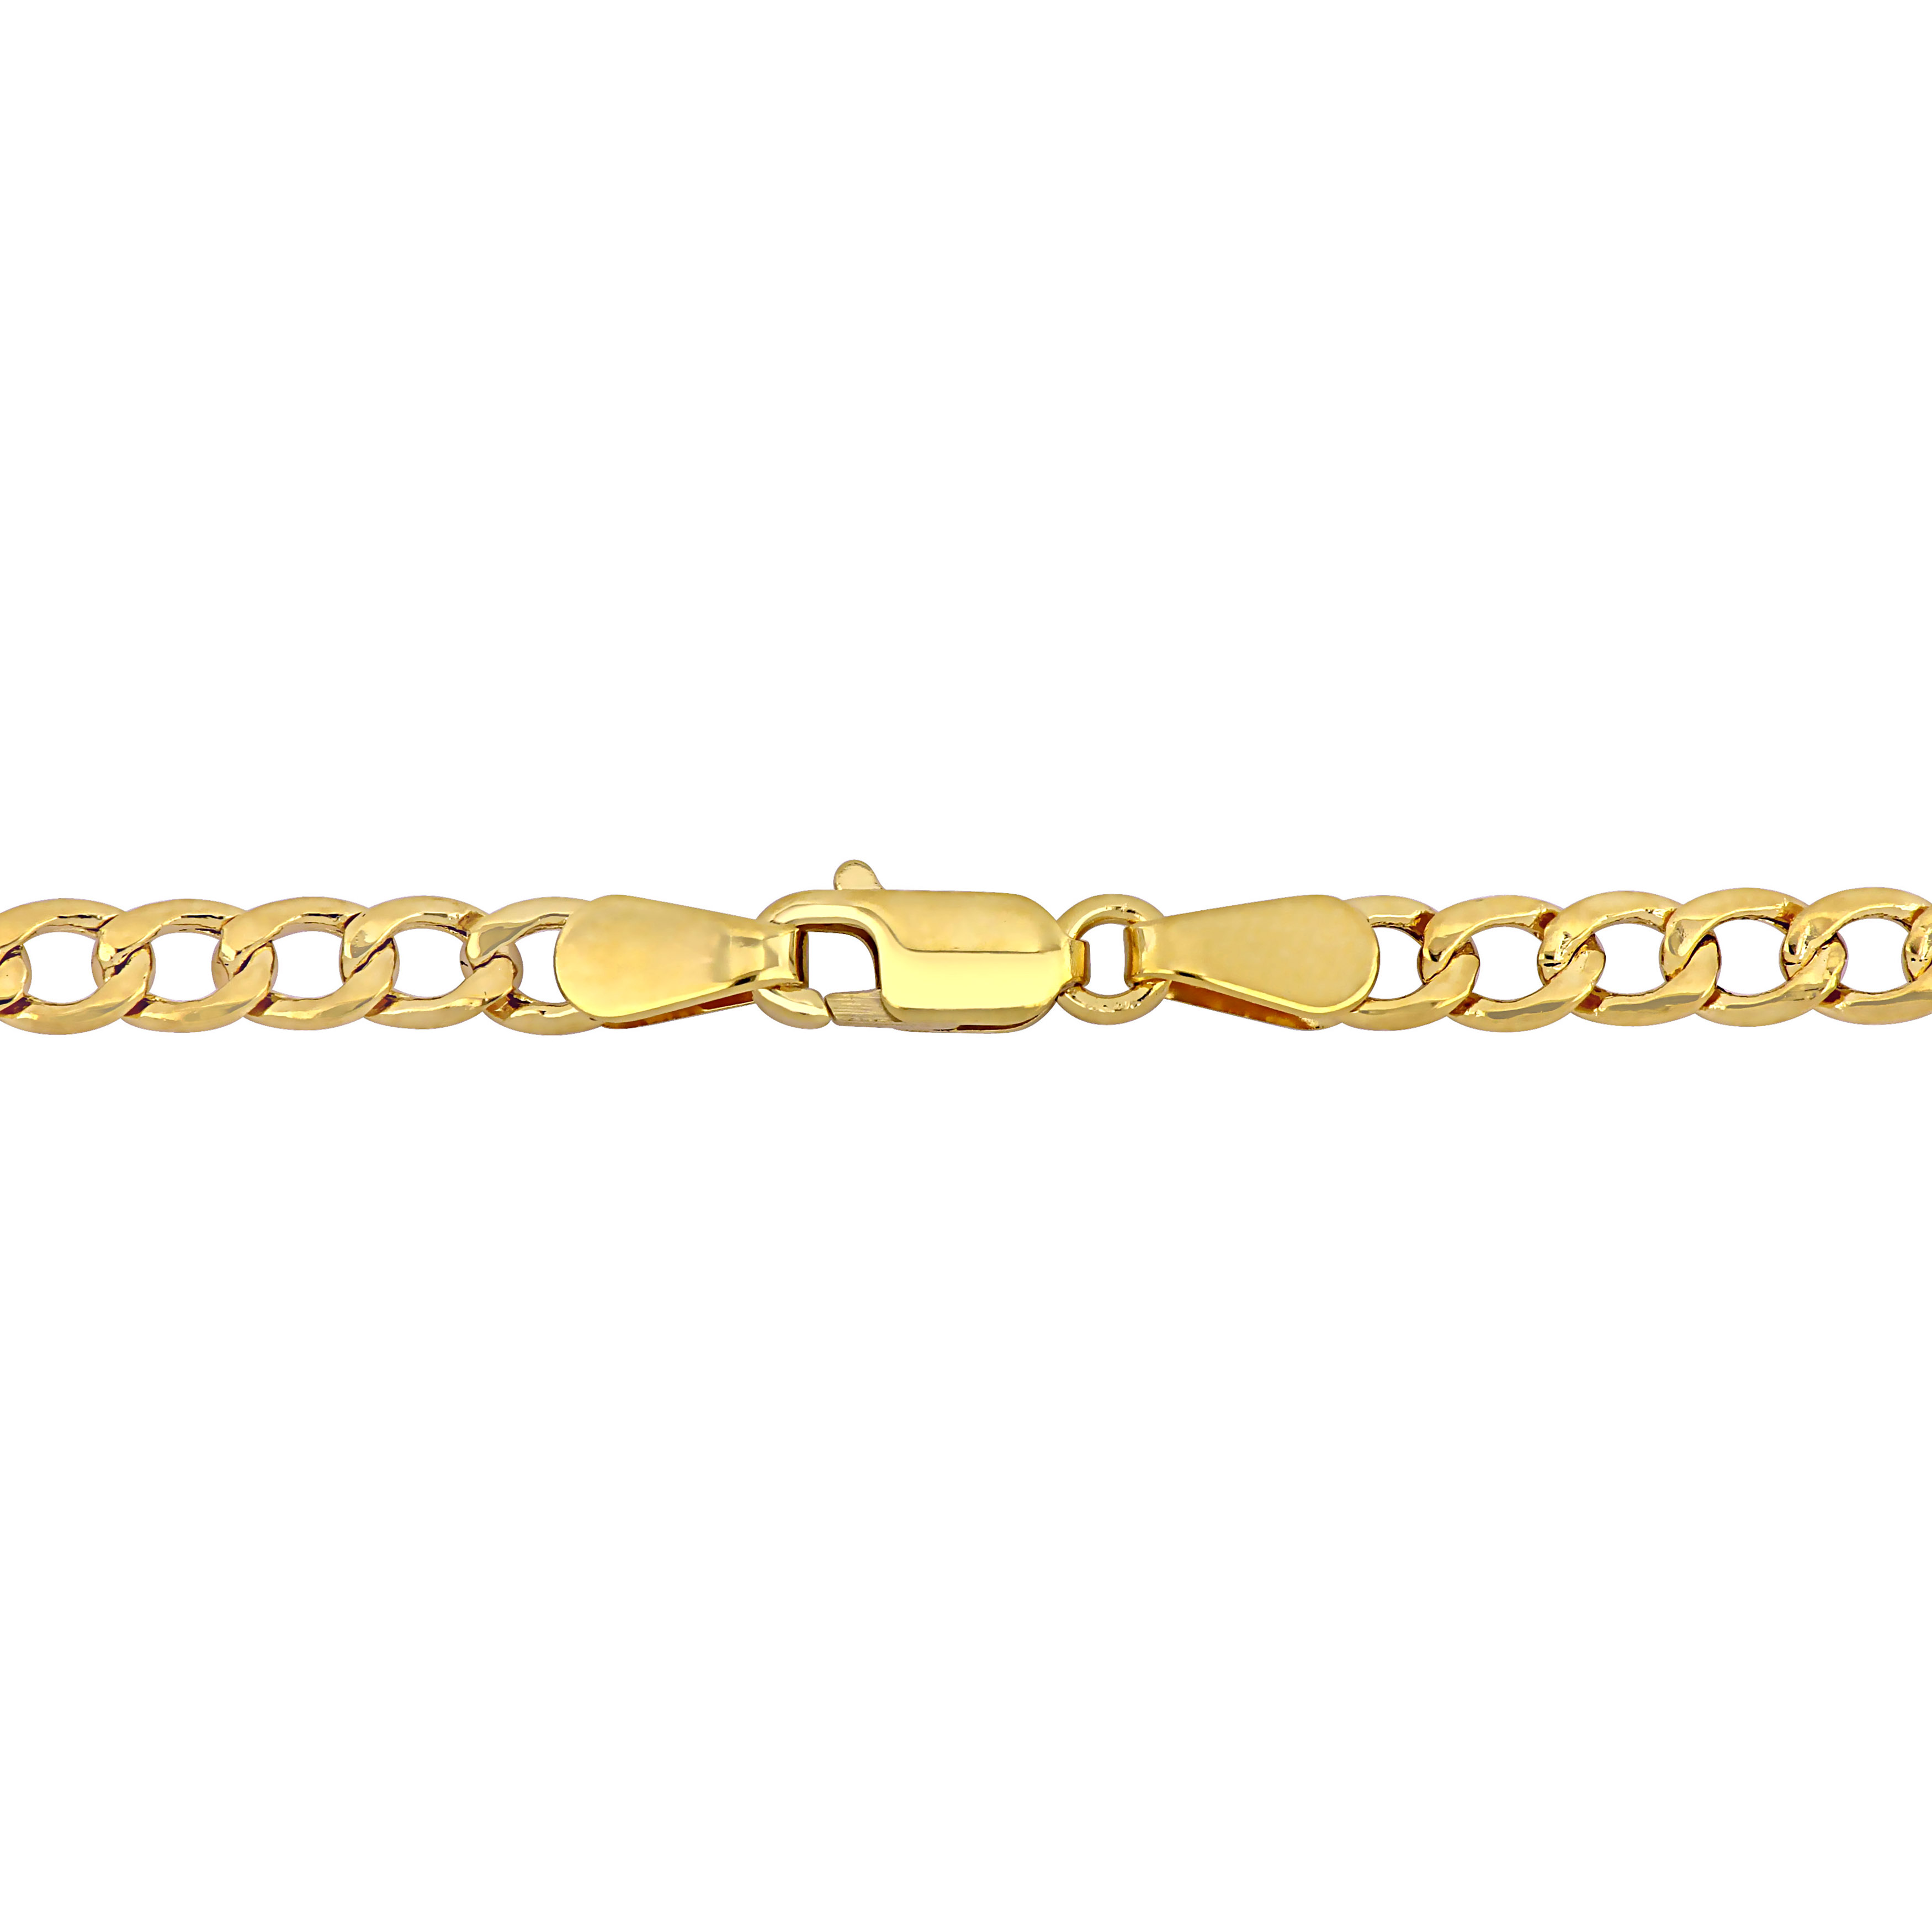 4mm Curb Link Chain Bracelet in 14k Yellow Gold - 7.5 in.